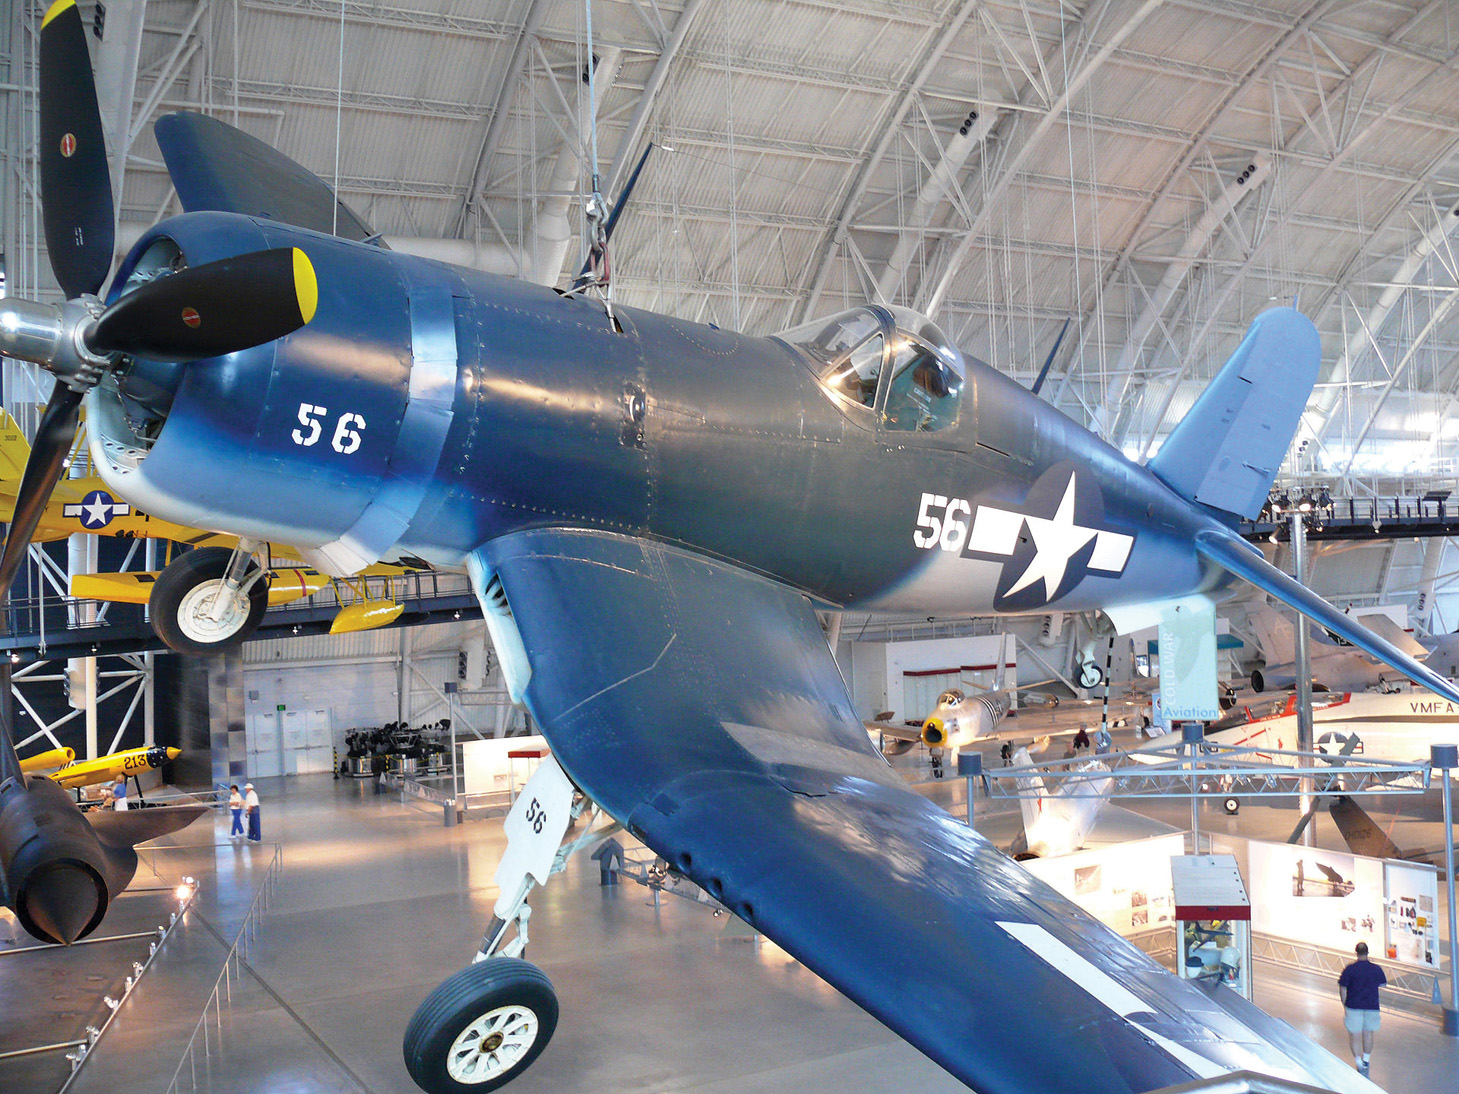 As if seen in flight, this Vought-Sikorsky U.S. Navy Corsair R4U hangs close to a visitor viewing platform.